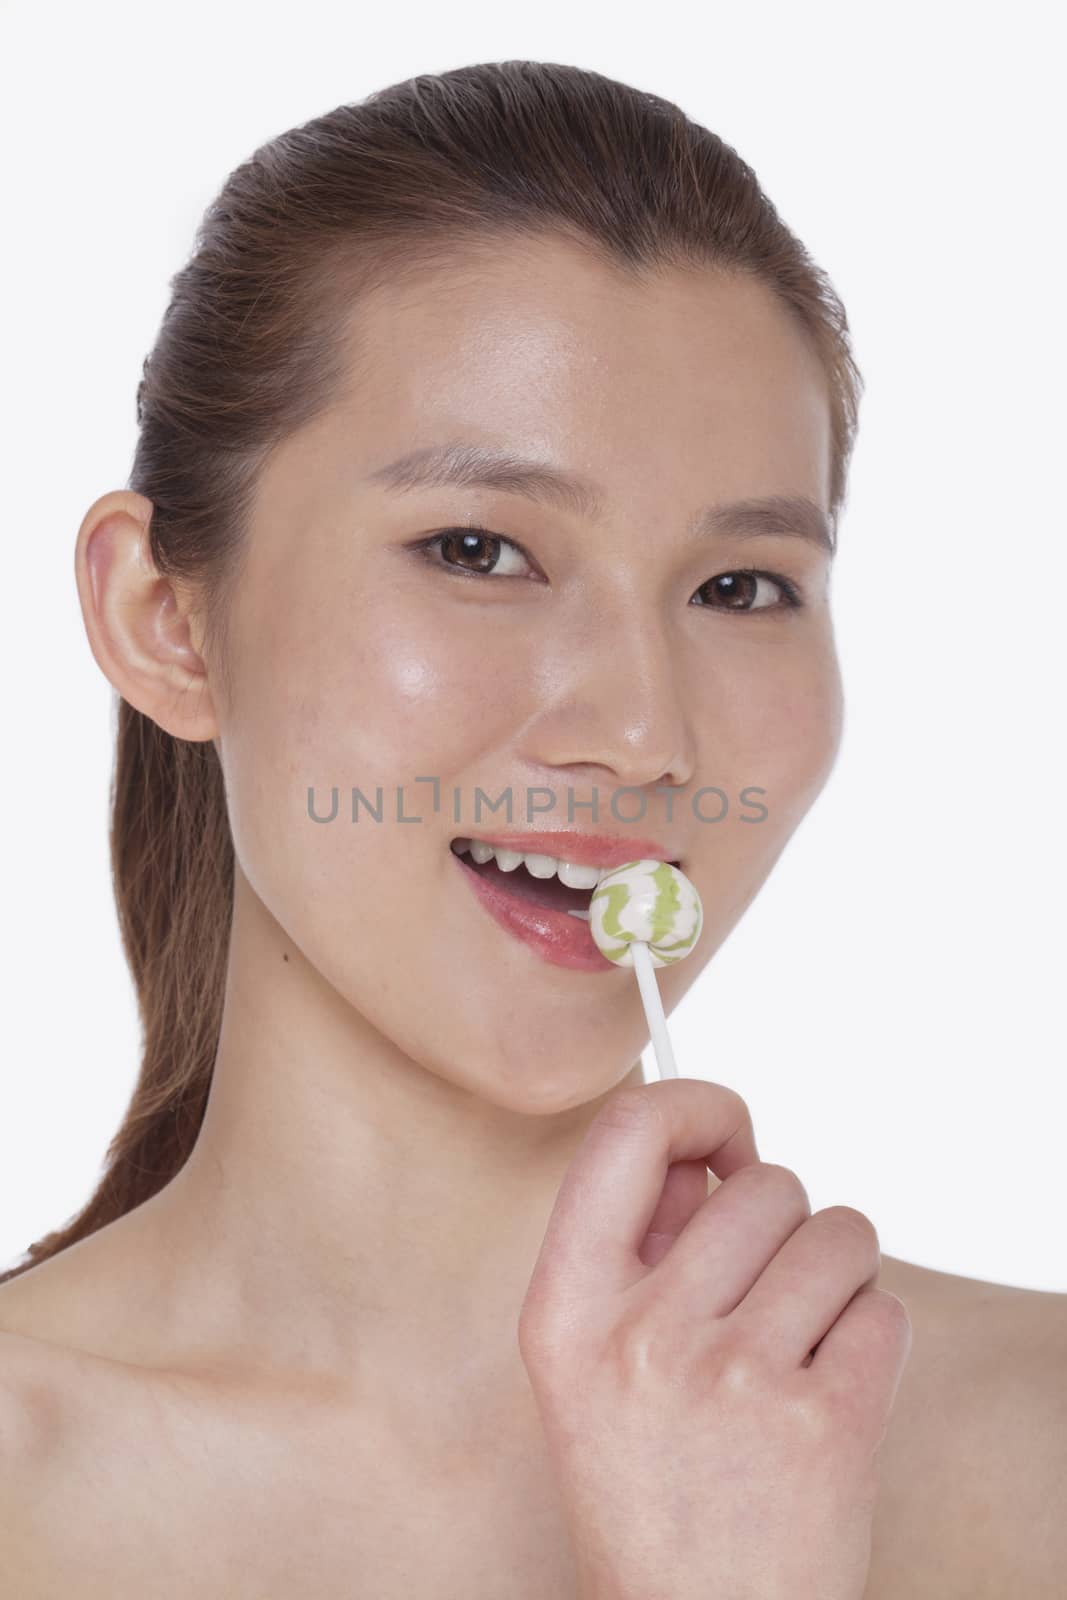 Smiling young woman looking into camera and licking a lollipop, studio shot